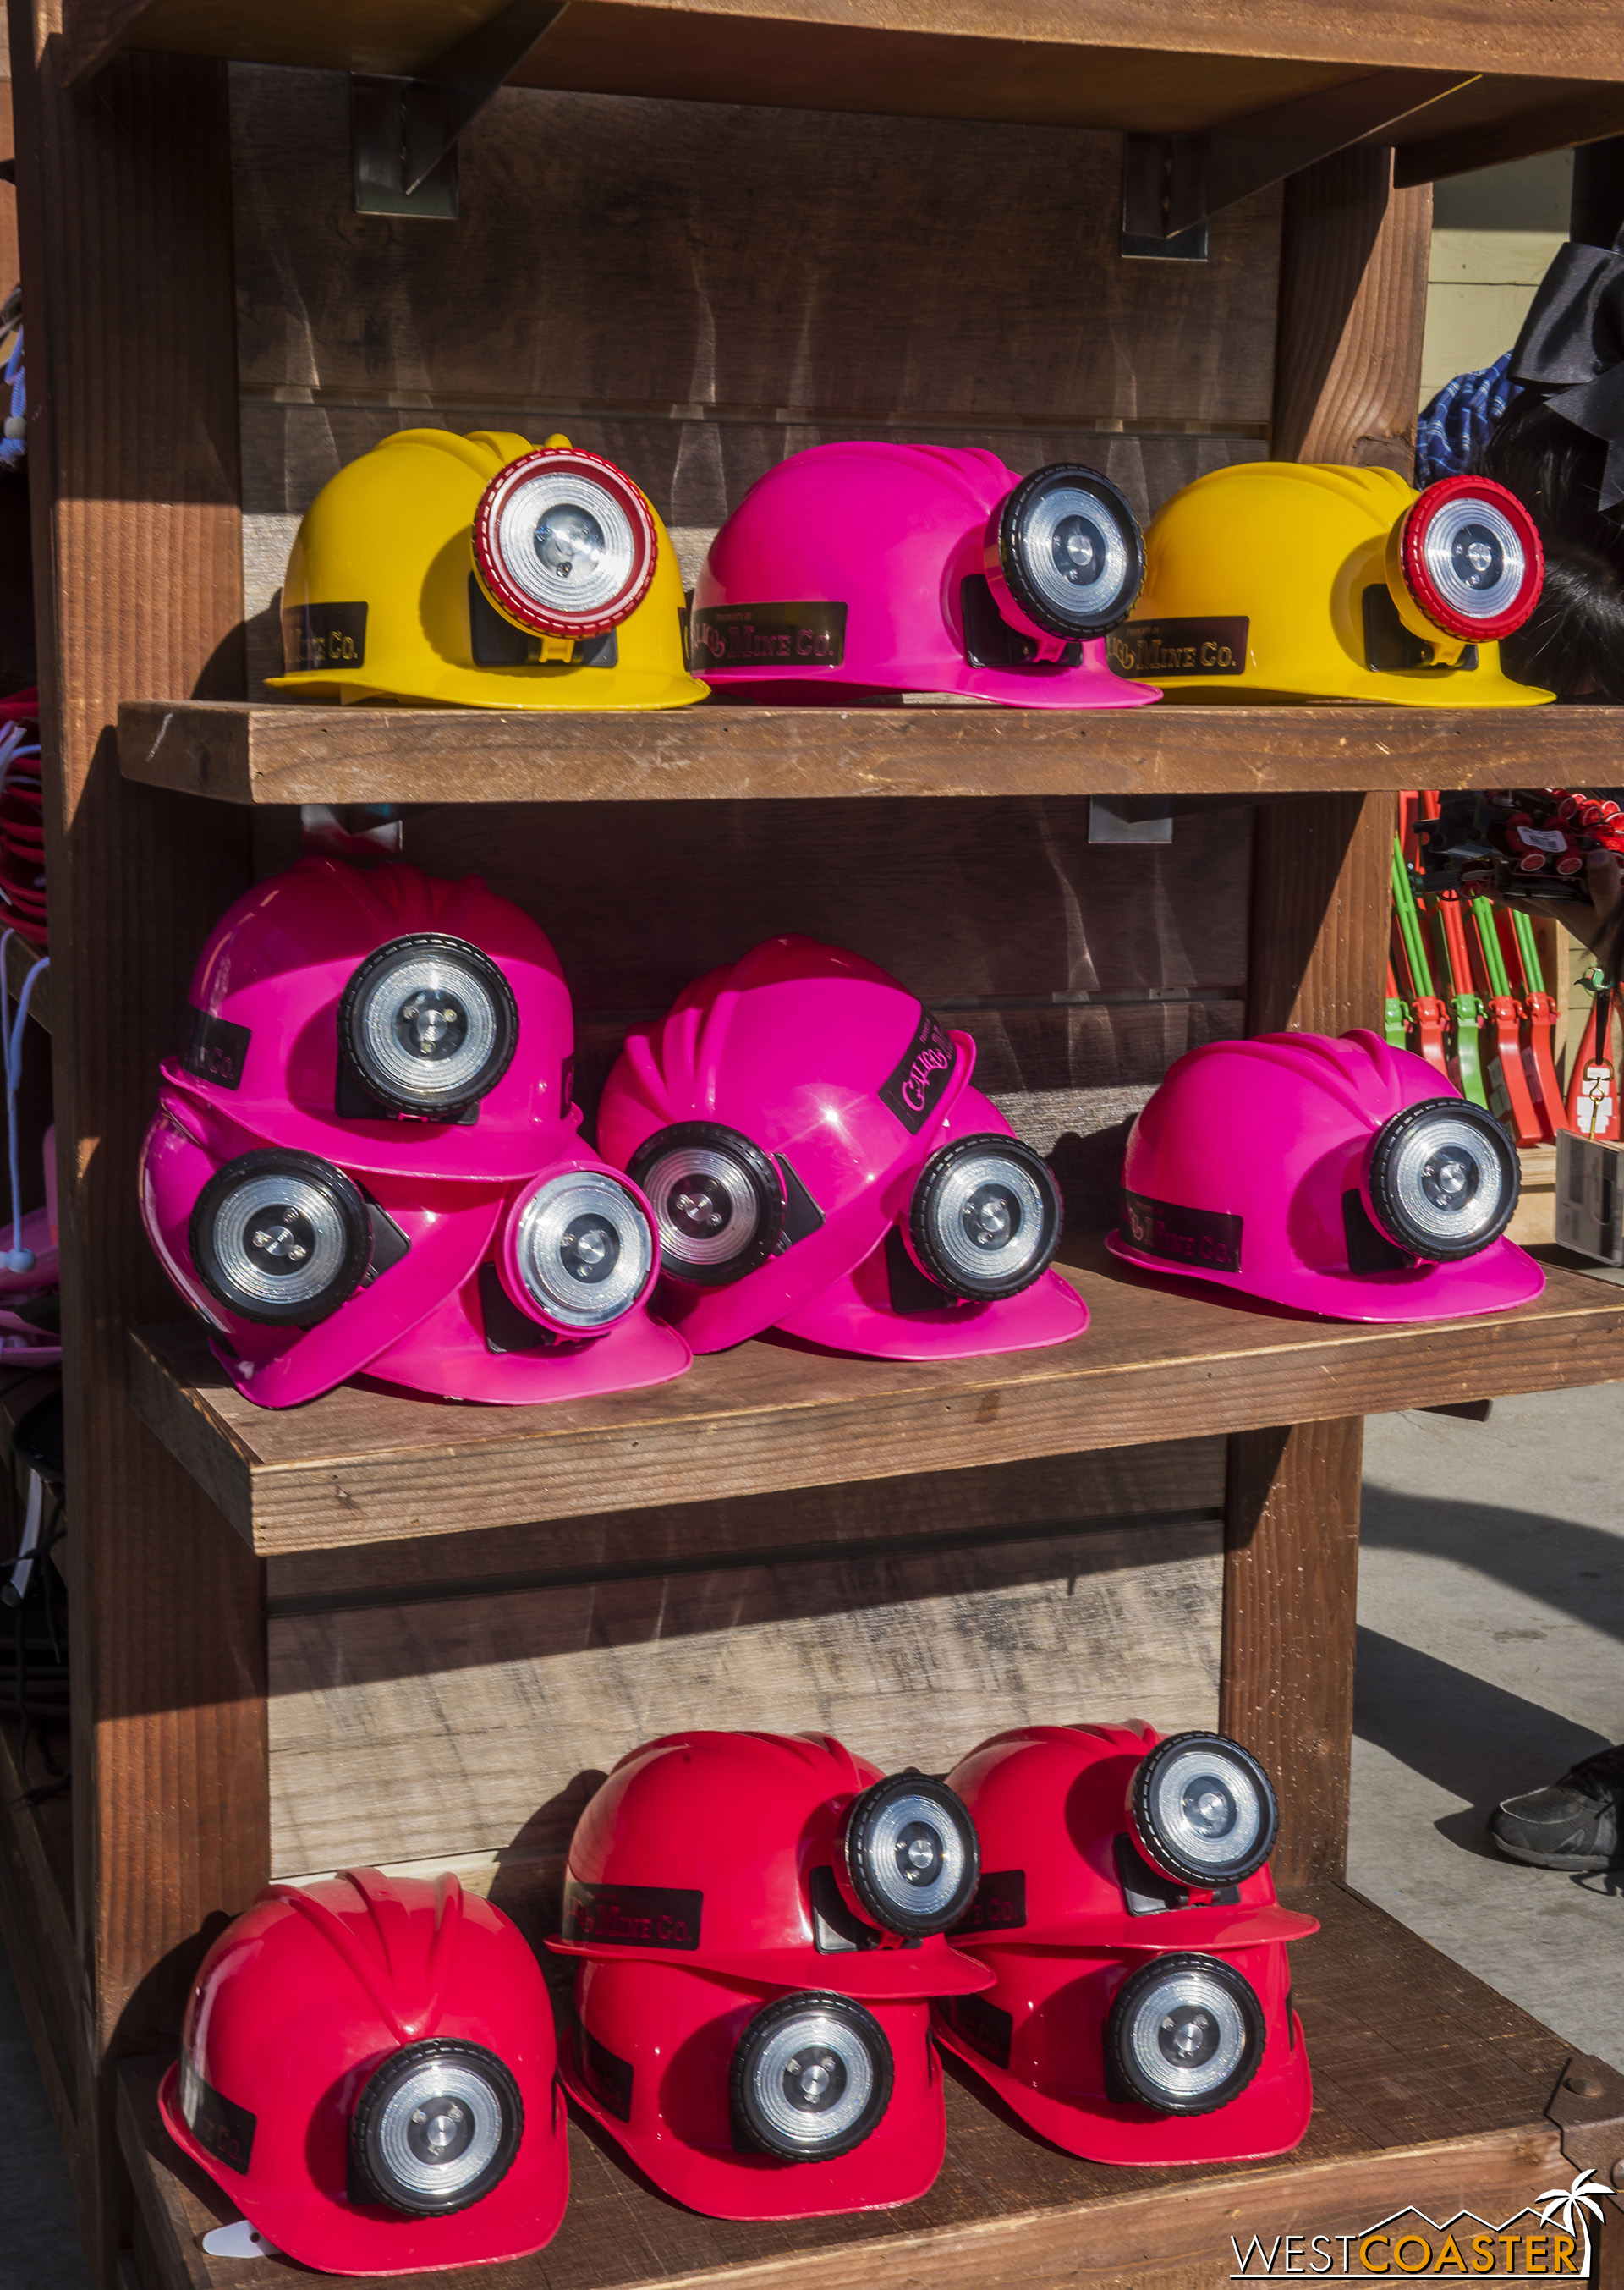  Not really festival merch, but these colorful miner’s hats are kind of absurd. 